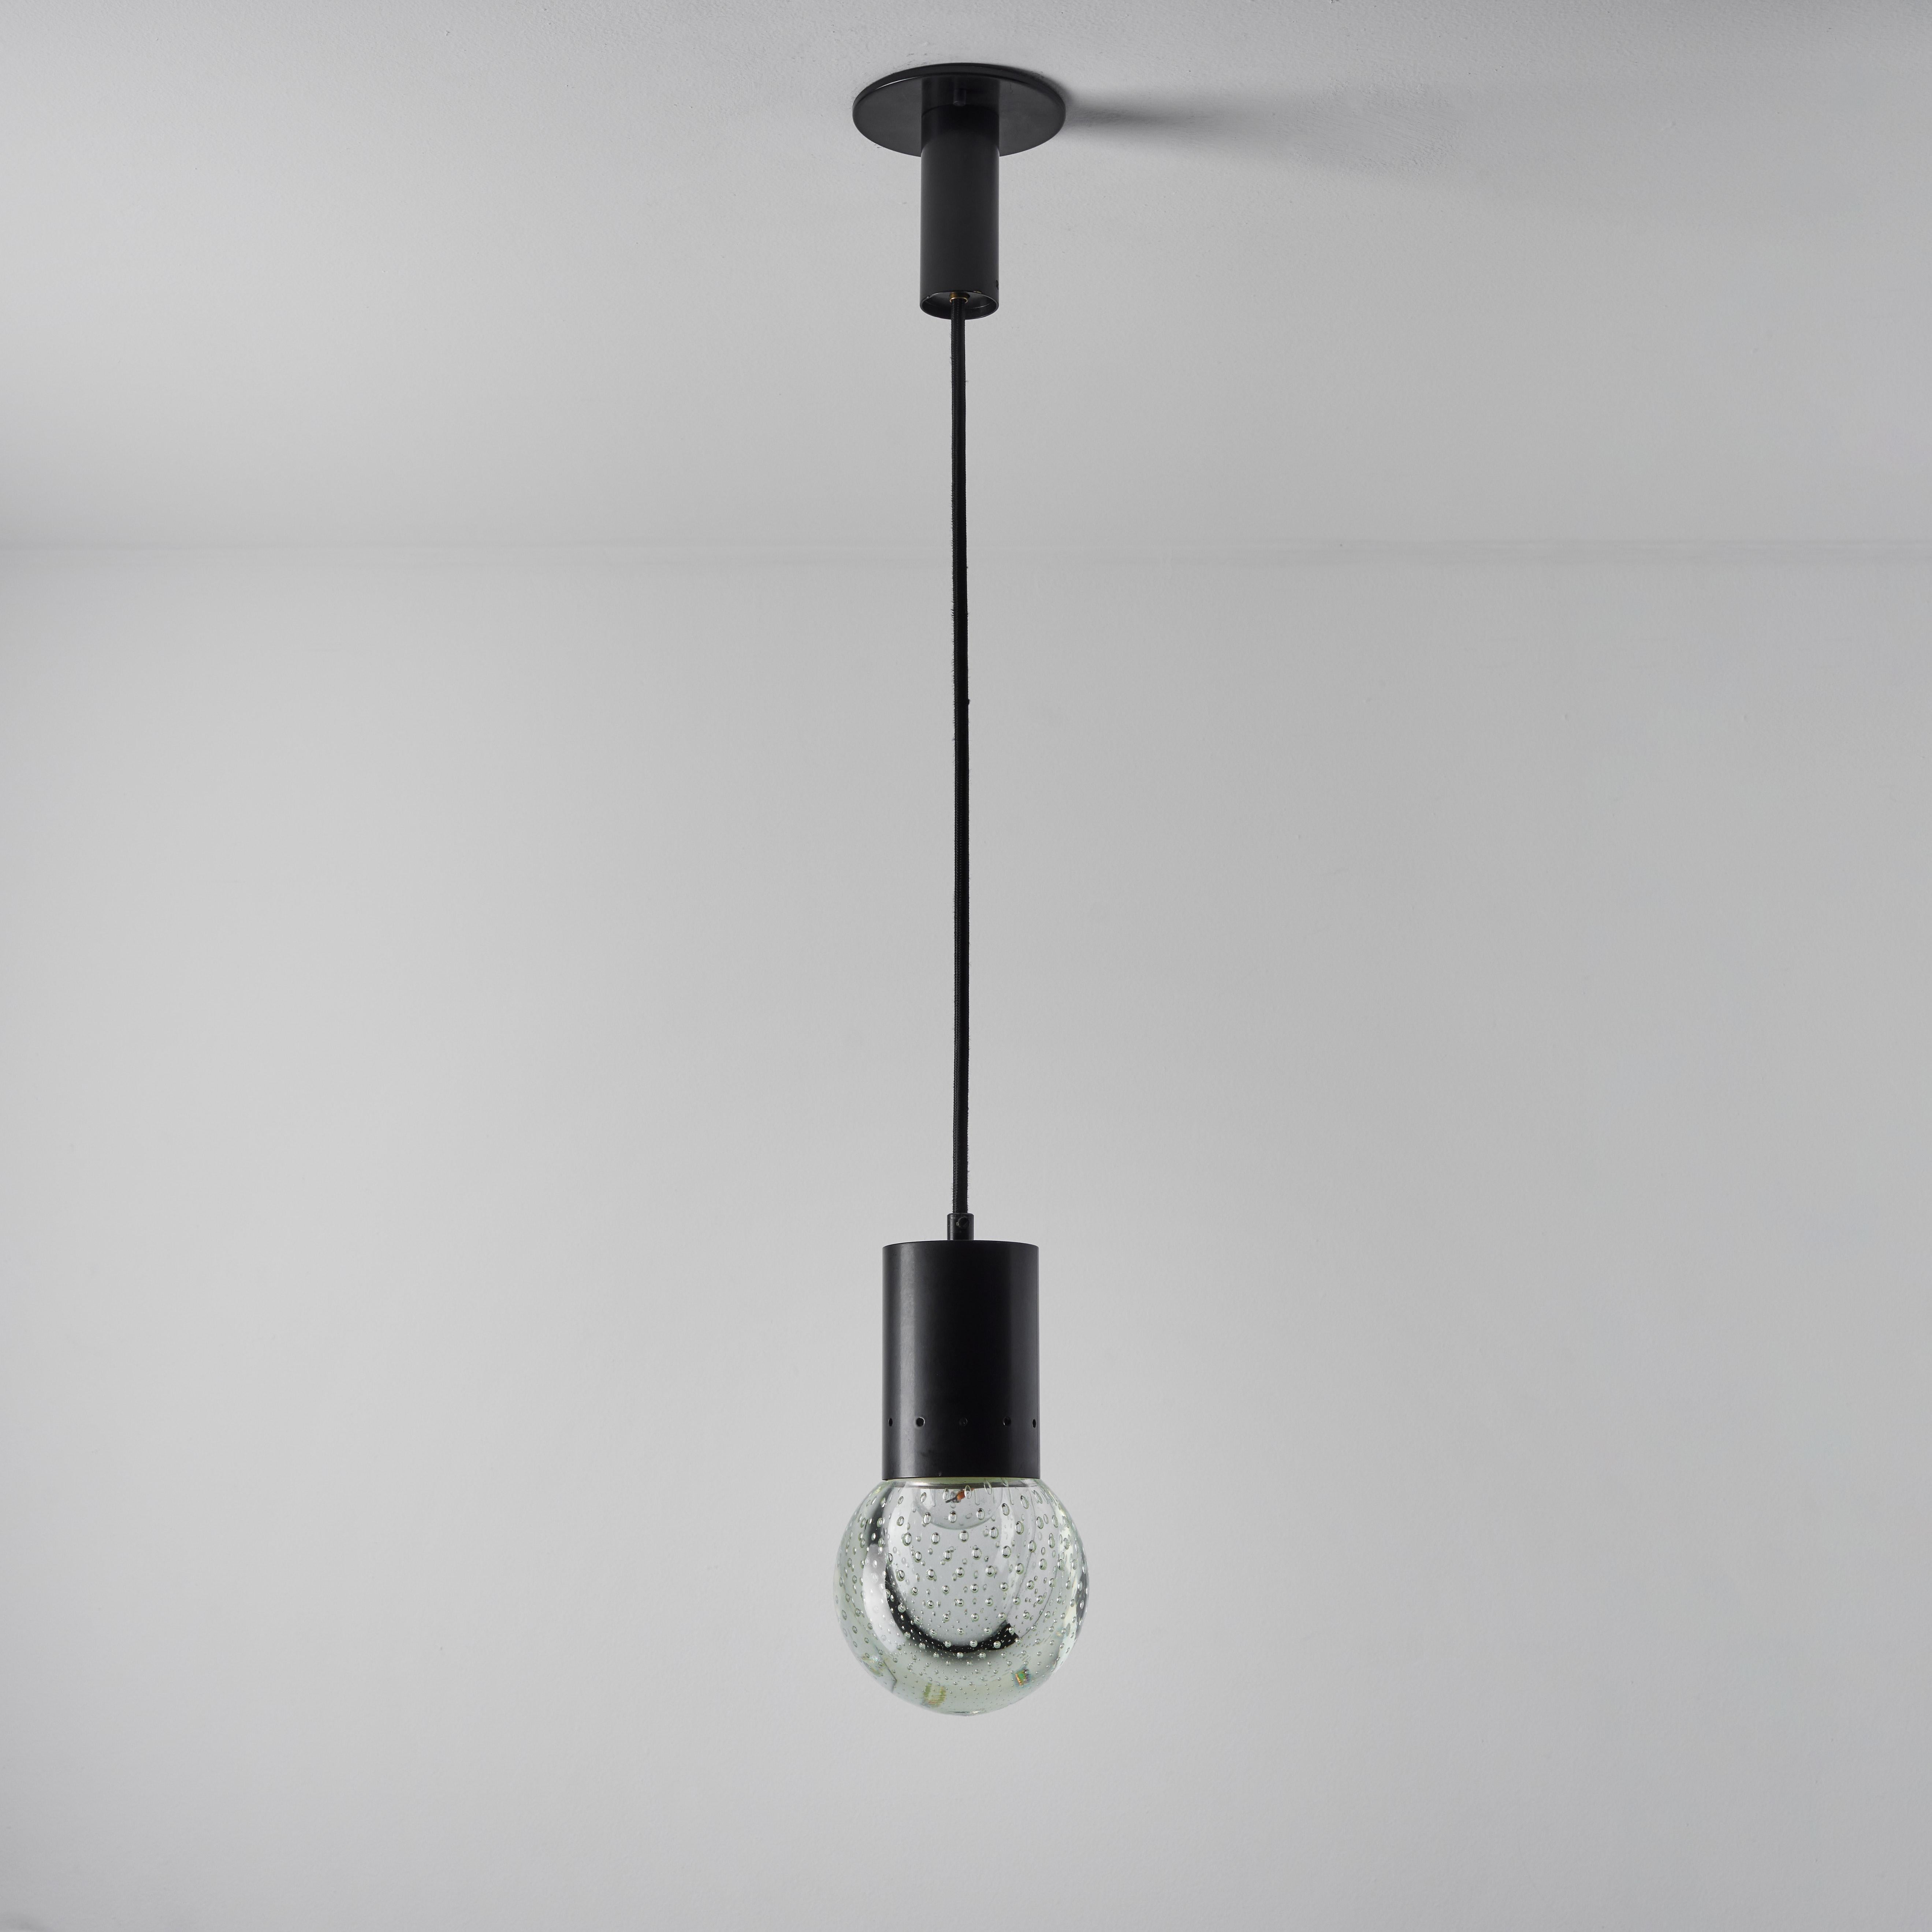 1960s Gino Sarfatti metal and Seguso glass pendant for Arteluce. Executed in hand blown bubbled Seguso glass and painted metal. The simplicity of Sarfatti's design and the sculptural shaping of the materials make for an incredibly refined example of